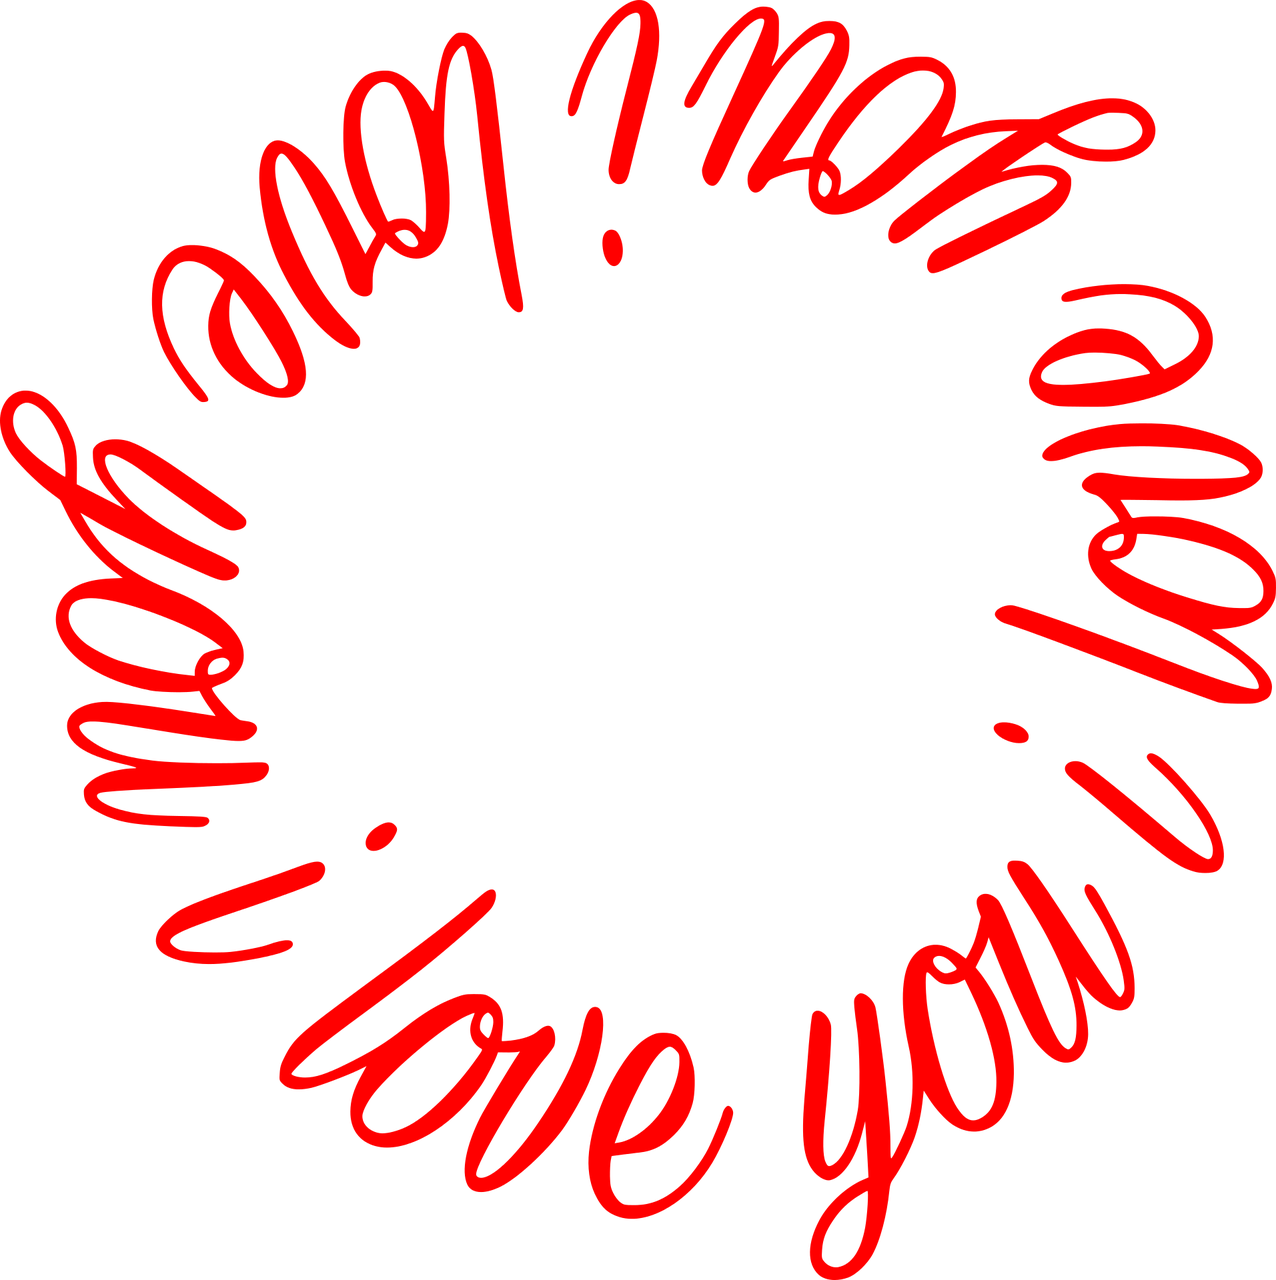 a circle of words written in red on a black background, a digital rendering, i love you, may), your mom, neon sign